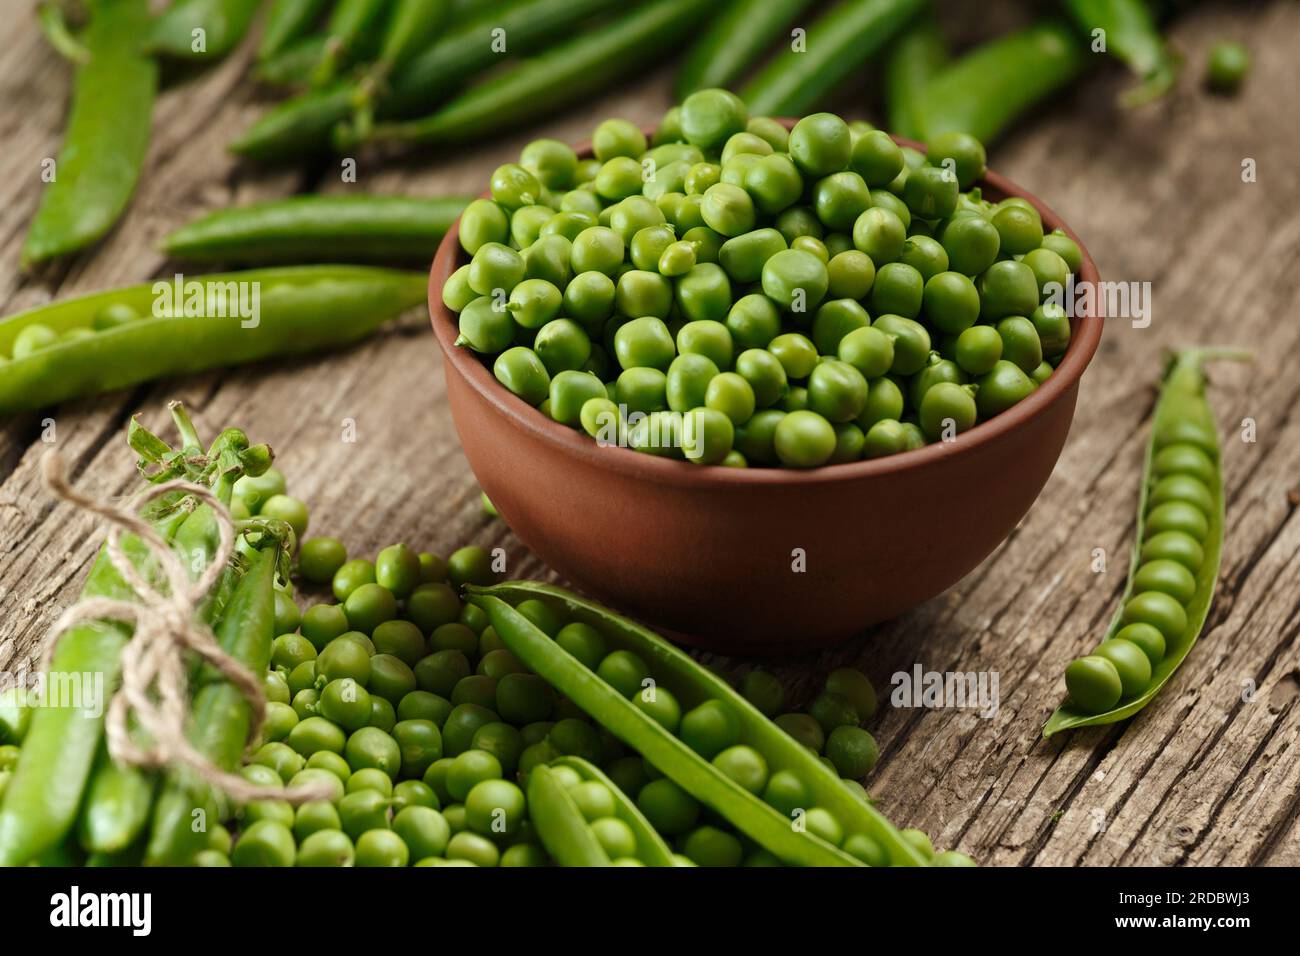 Fresh organic green peas in closed and open pods, scattered pea seeds, shelled green peas in a clay bowl on an aged wooden background. Stock Photo